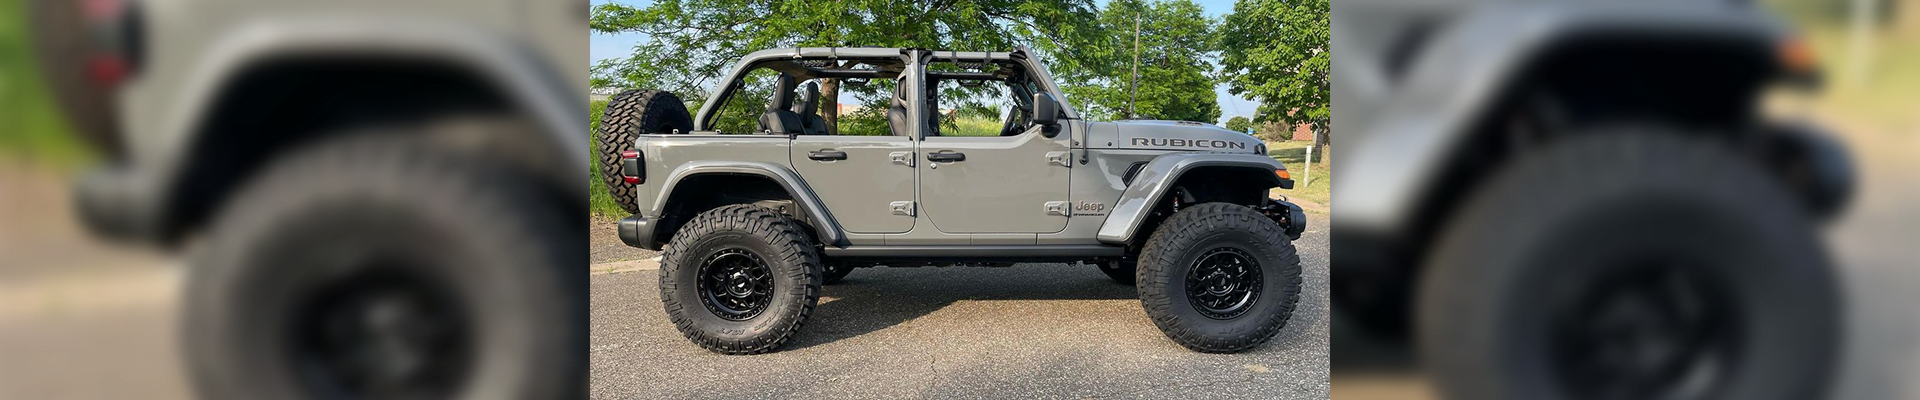 Jeep-Rubicon-Gallery-image-2.png